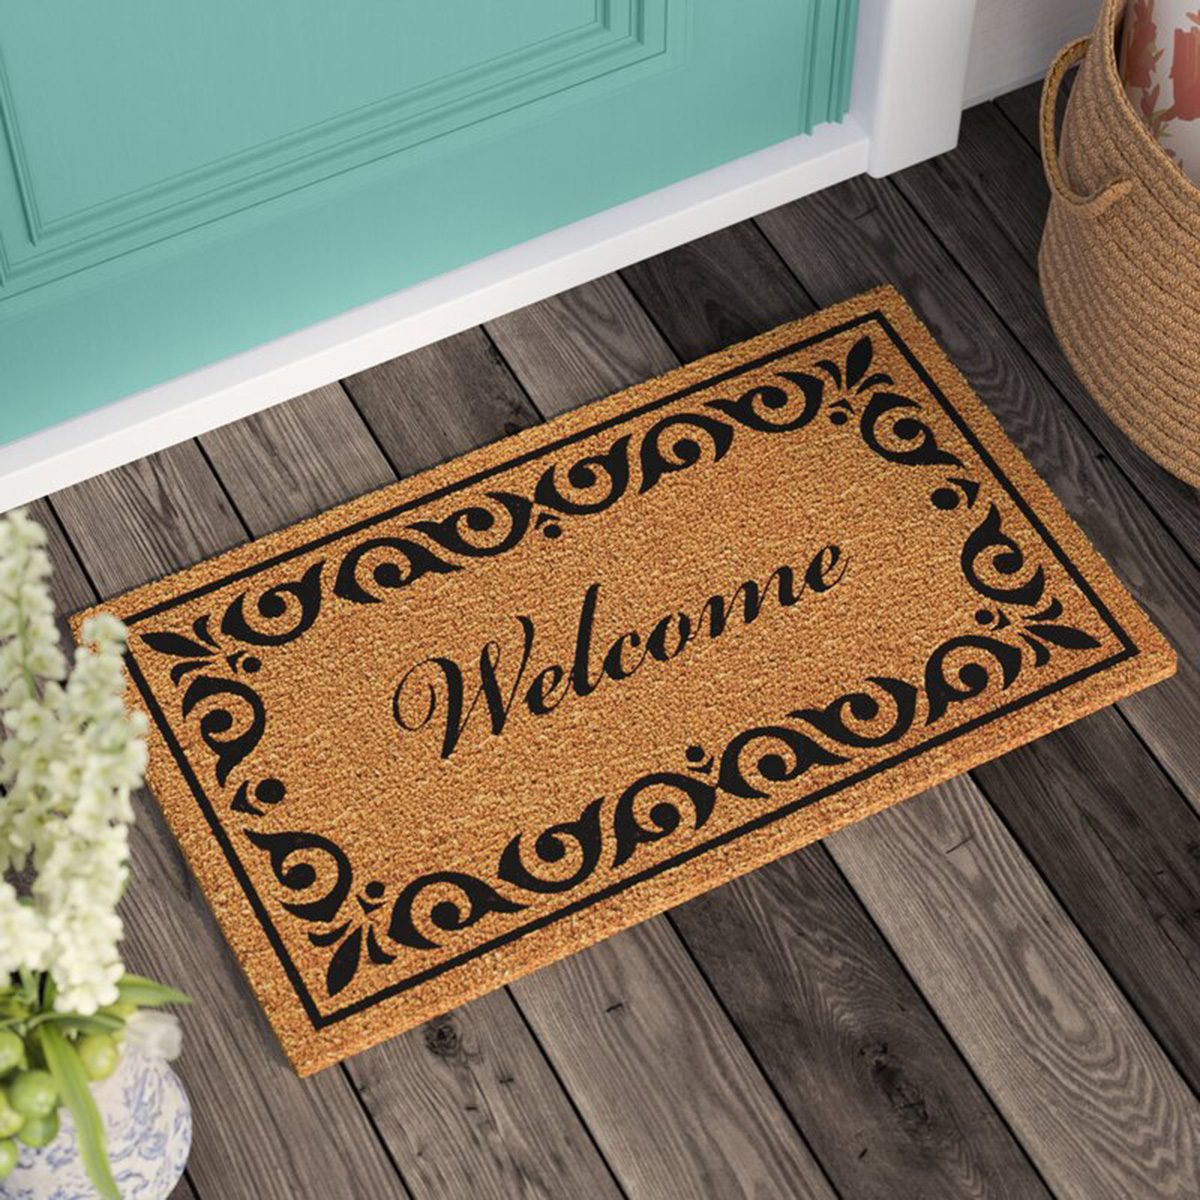 NEW NON SLIP RUBBER BACKING 45CMX75CM QUALITY WELCOME OUTSIDE DOORMATS BLACK 